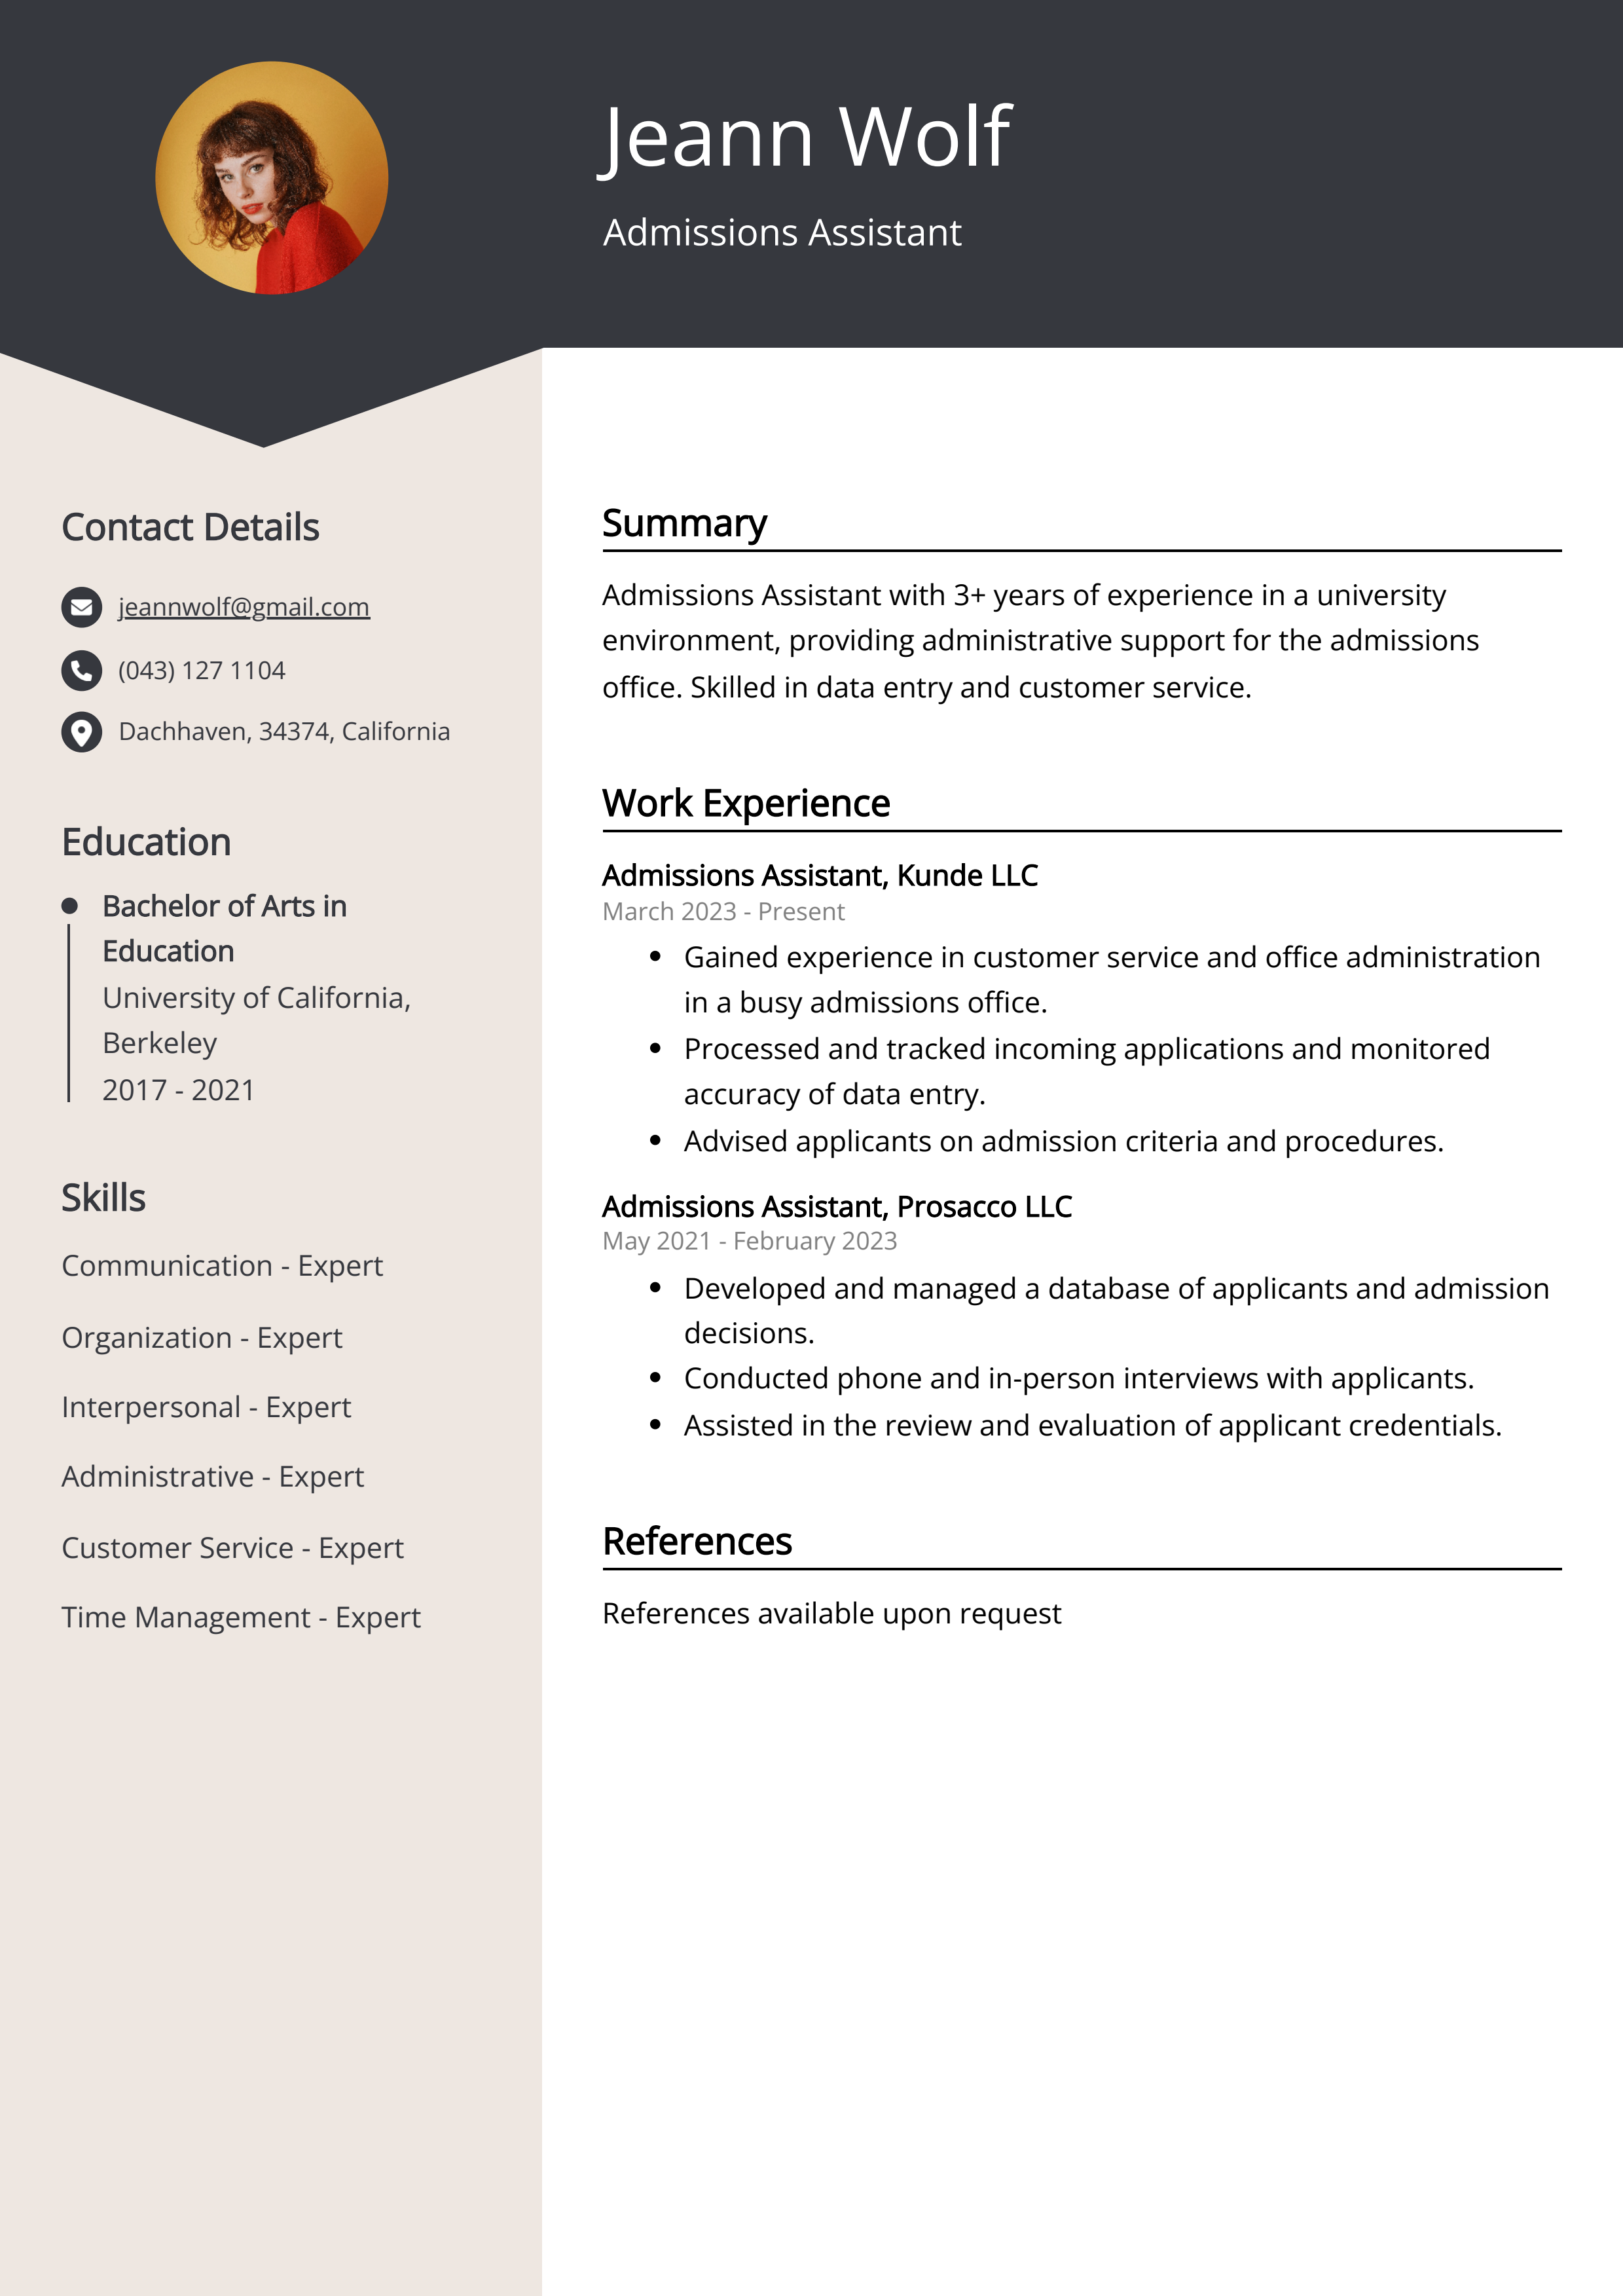 Admissions Assistant CV Example